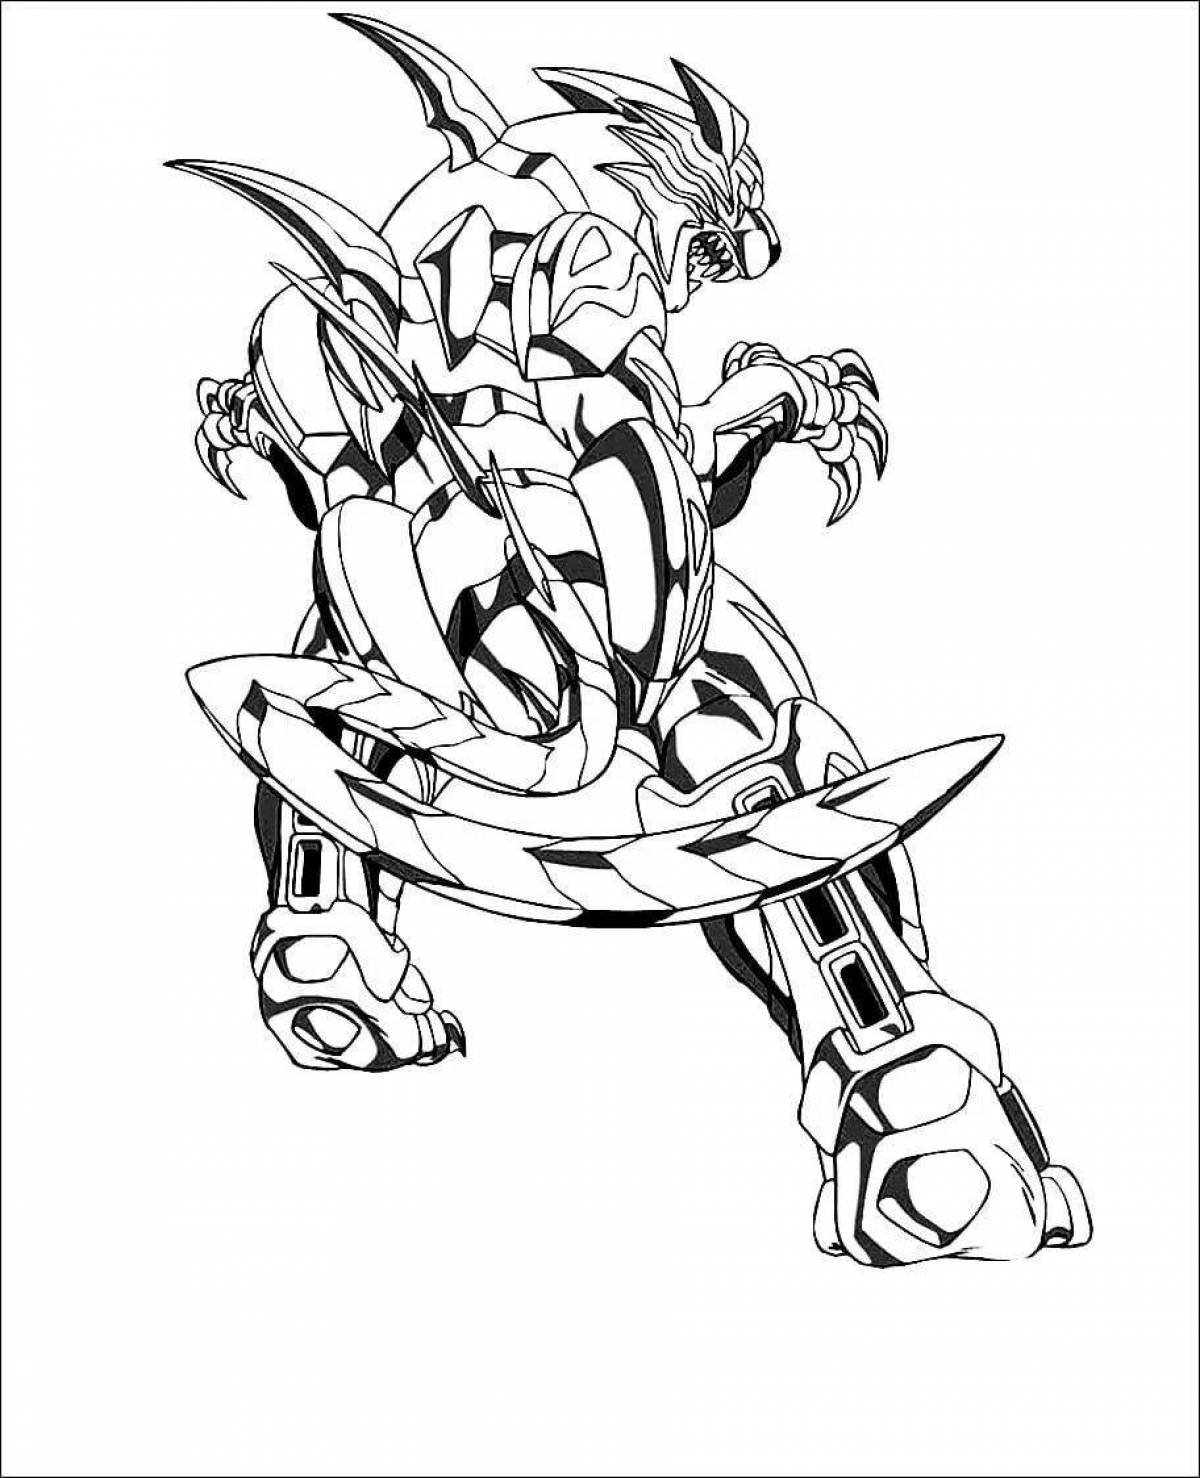 Fairy bakugan coloring pages for kids